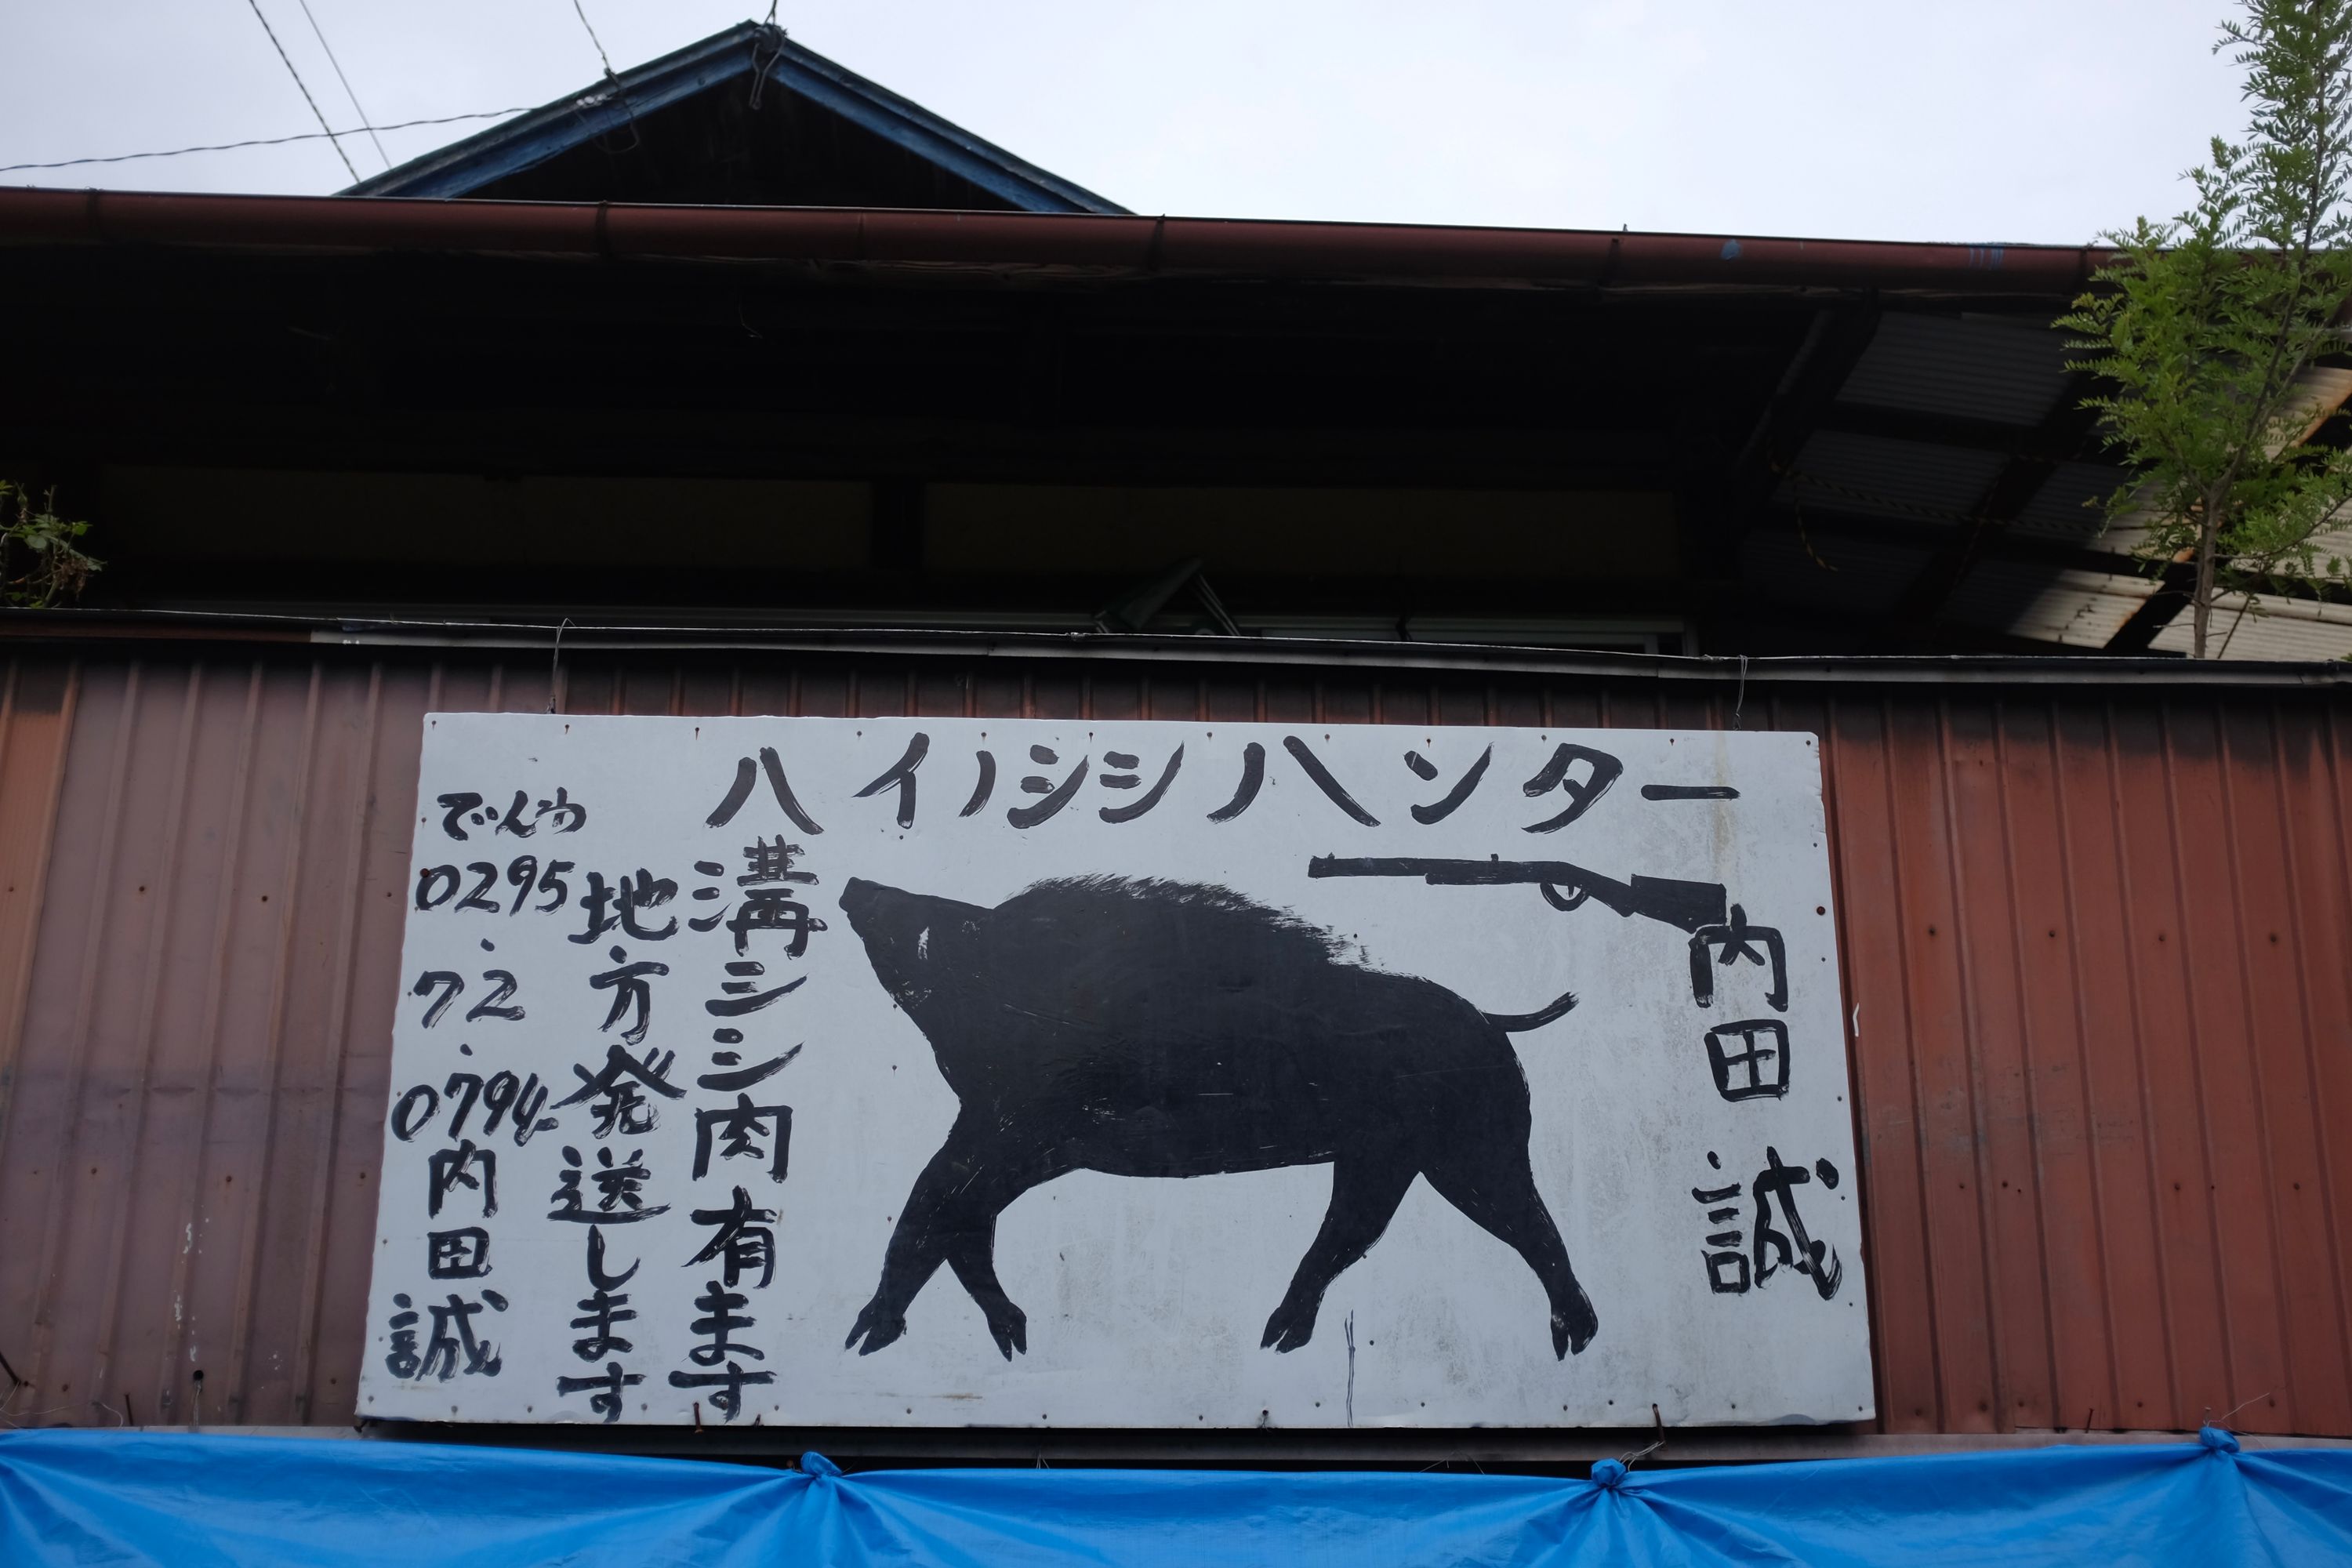 A poster of a wild boar, a gun, and a lot of Japanese text.